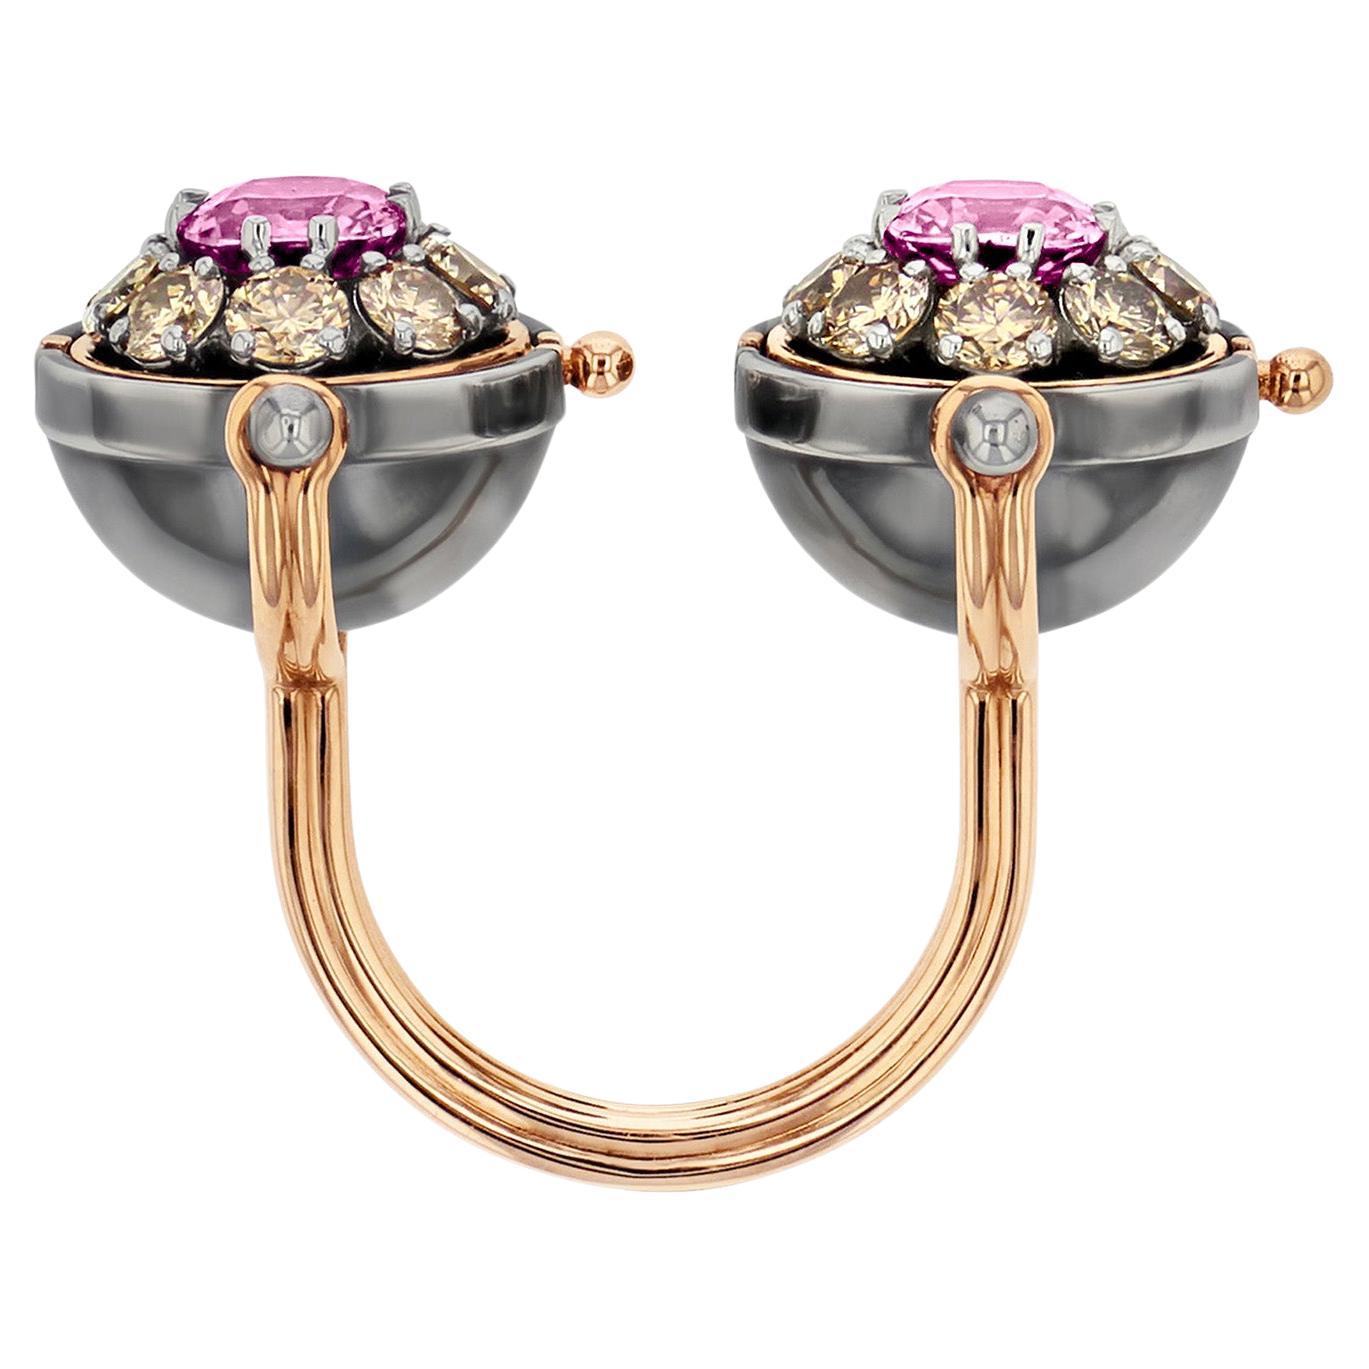 Pink Sapphire & Diamonds Sirius Toi&Moi Ring in 18k Rose Gold by Elie Top